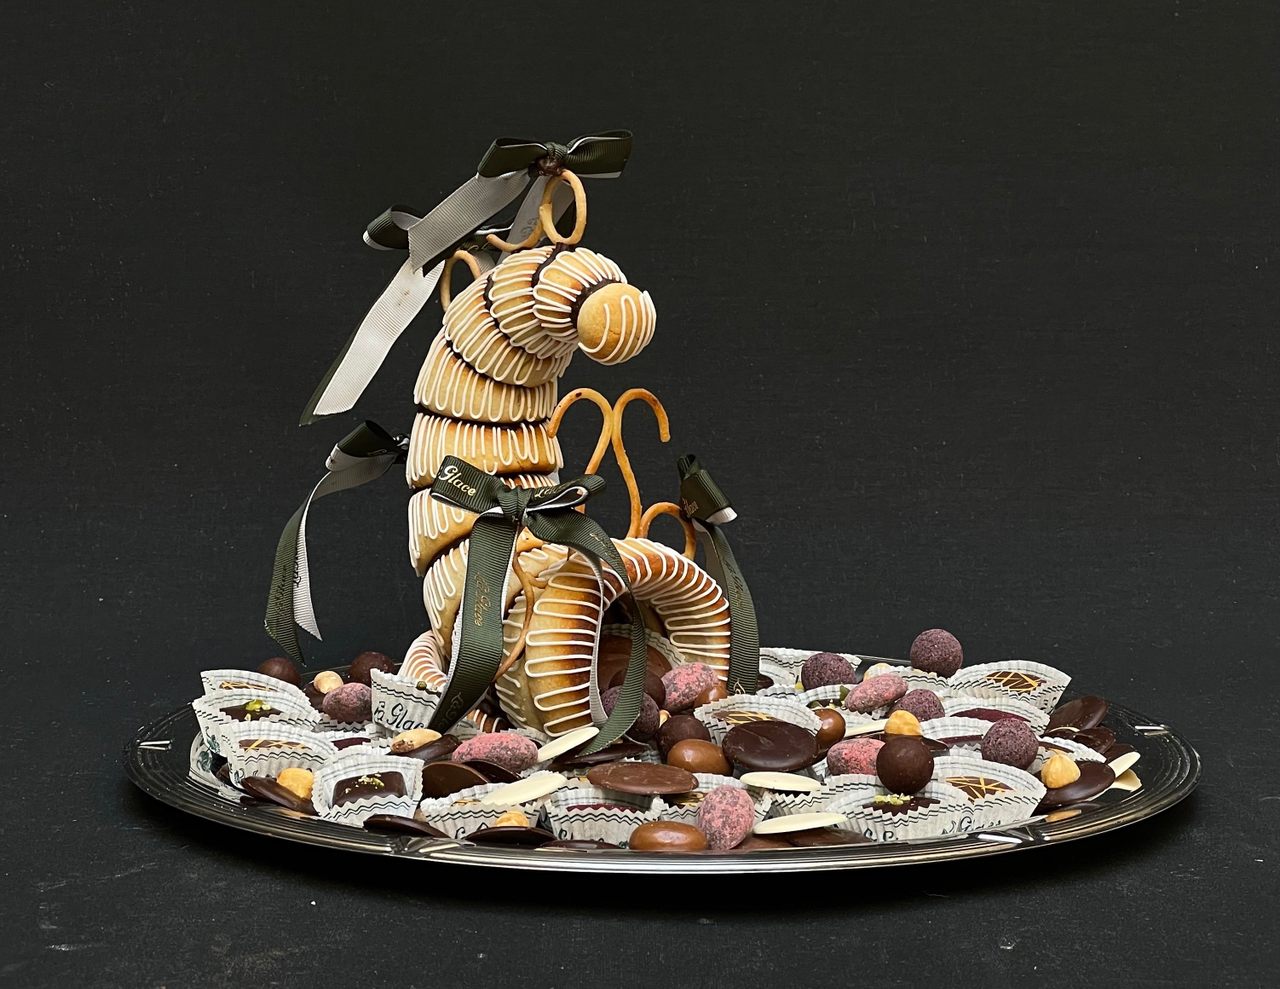 From the cavity of this florid horn emerges dozens of petit fours and chocolates in a bountiful display of plenty.